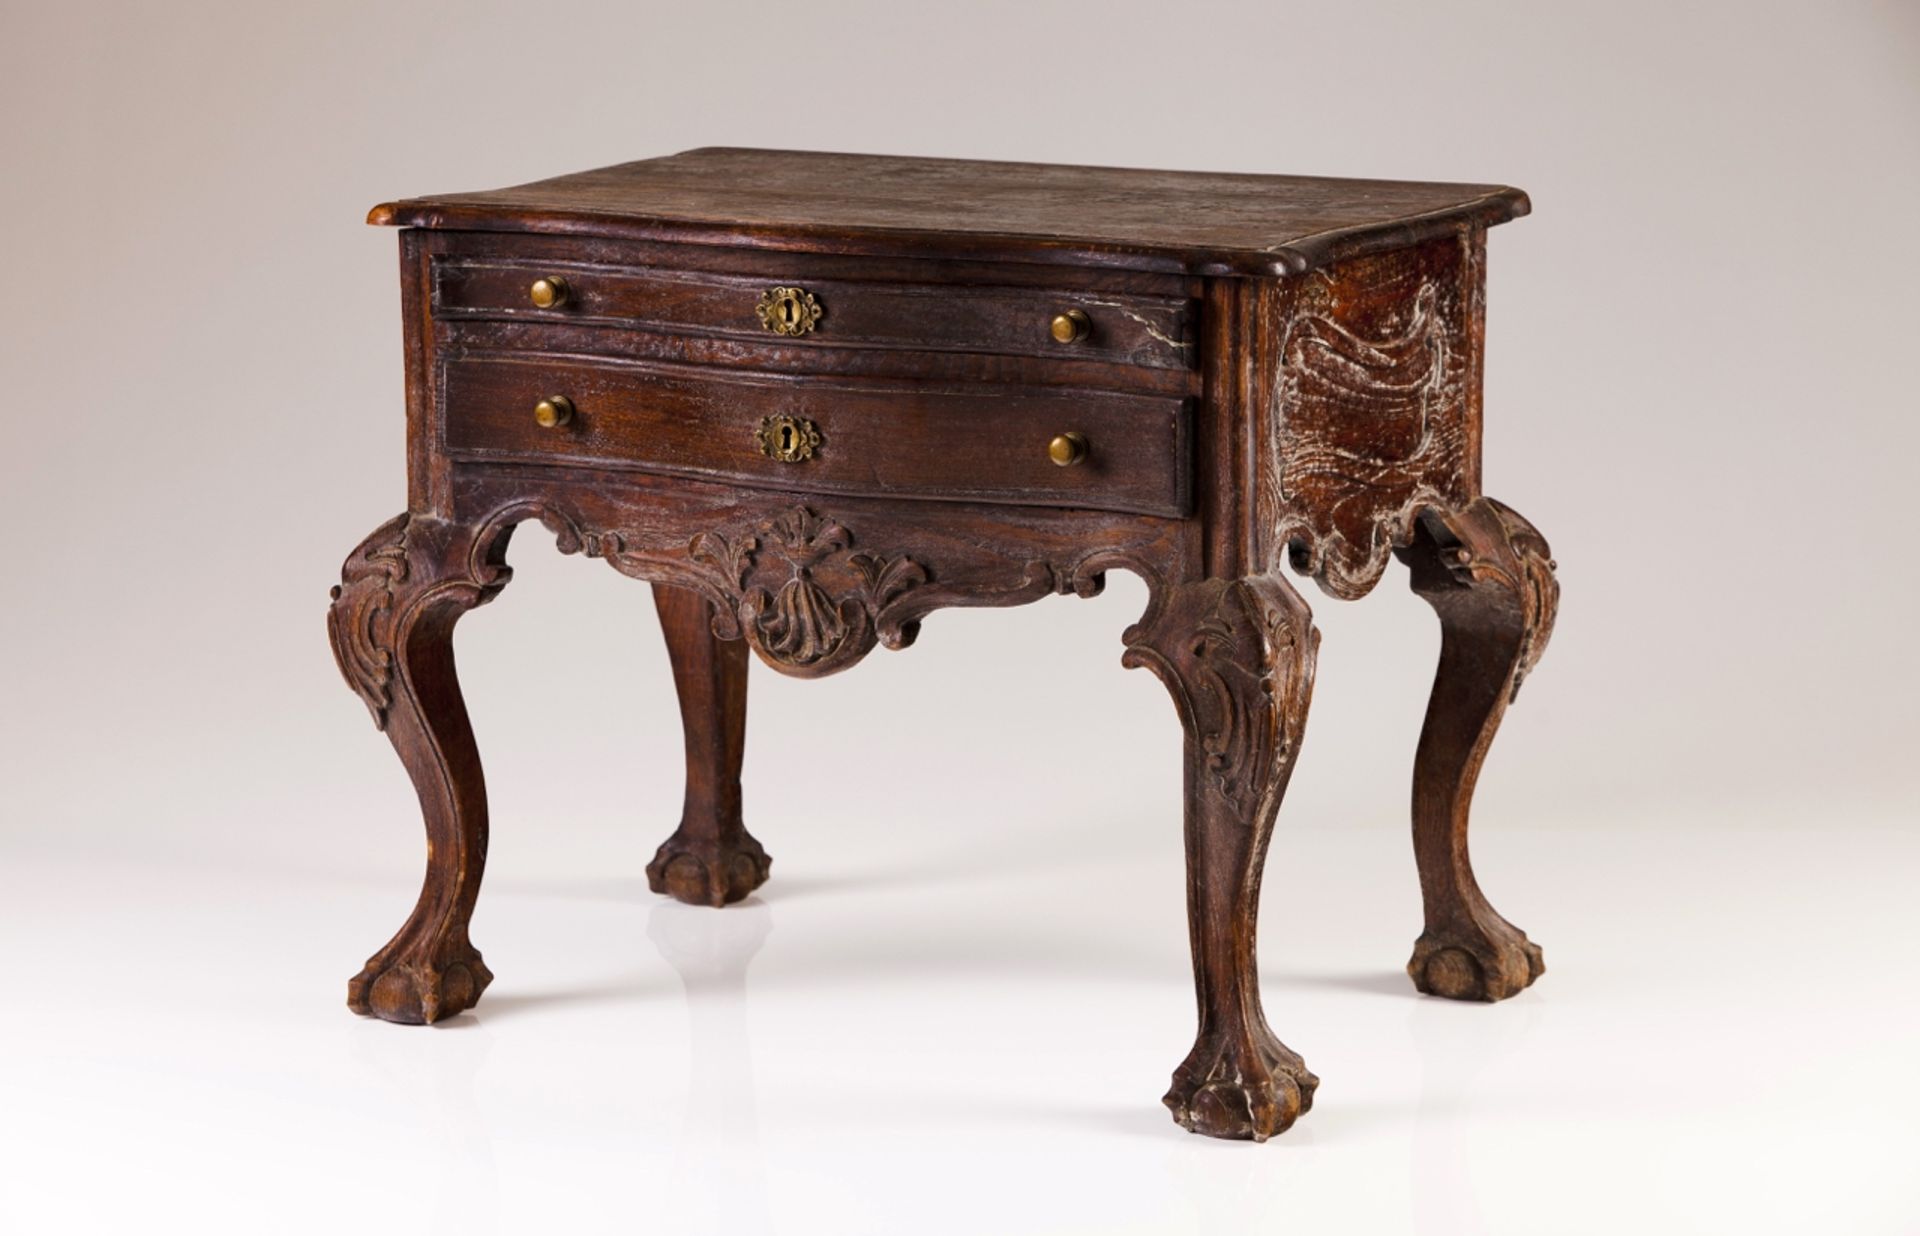 A chestnut small side table  In the D.José style  Decorated with carvings  Scalloped aprons, ball